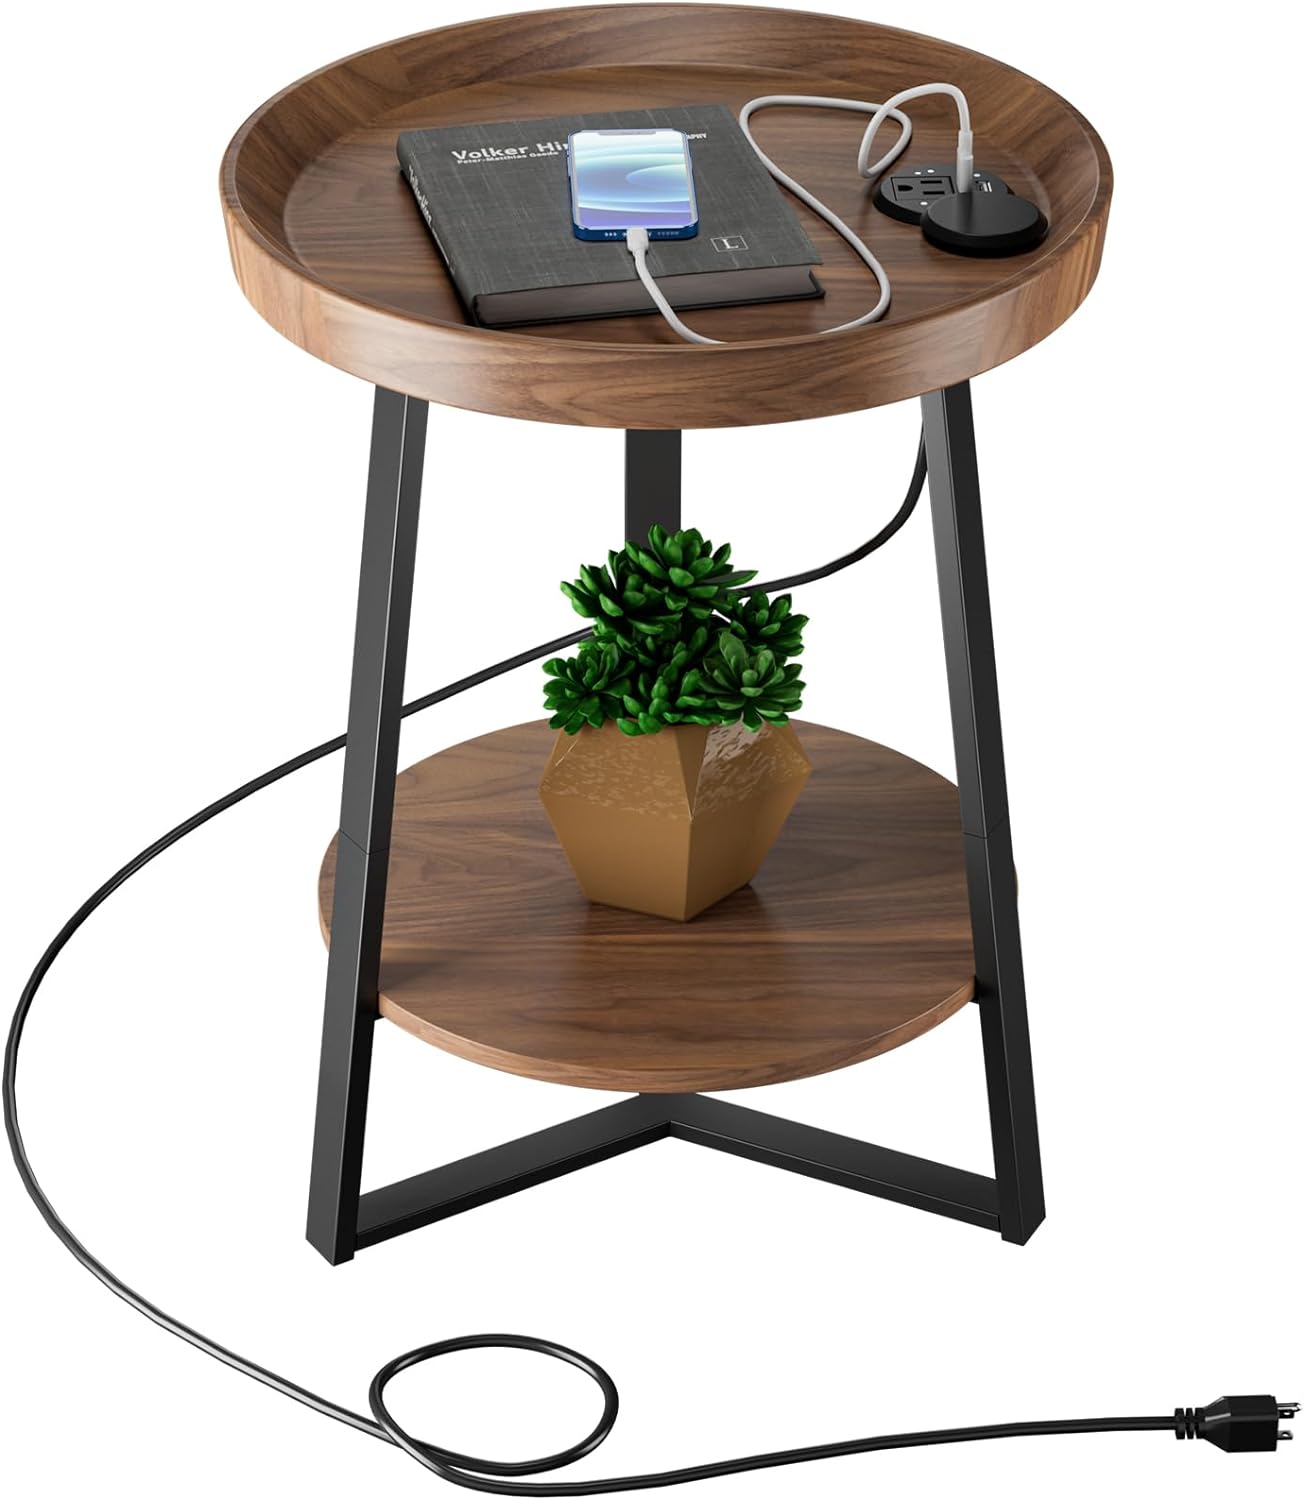 Gadroad Round End Table with Charging Station, USB Ports, Wood Tabletop & Black Metal Frame, 2-Tier Side Table for Living Room, Bedroom, Cherry Brown 15.7 * 15.7 * 23.6inches